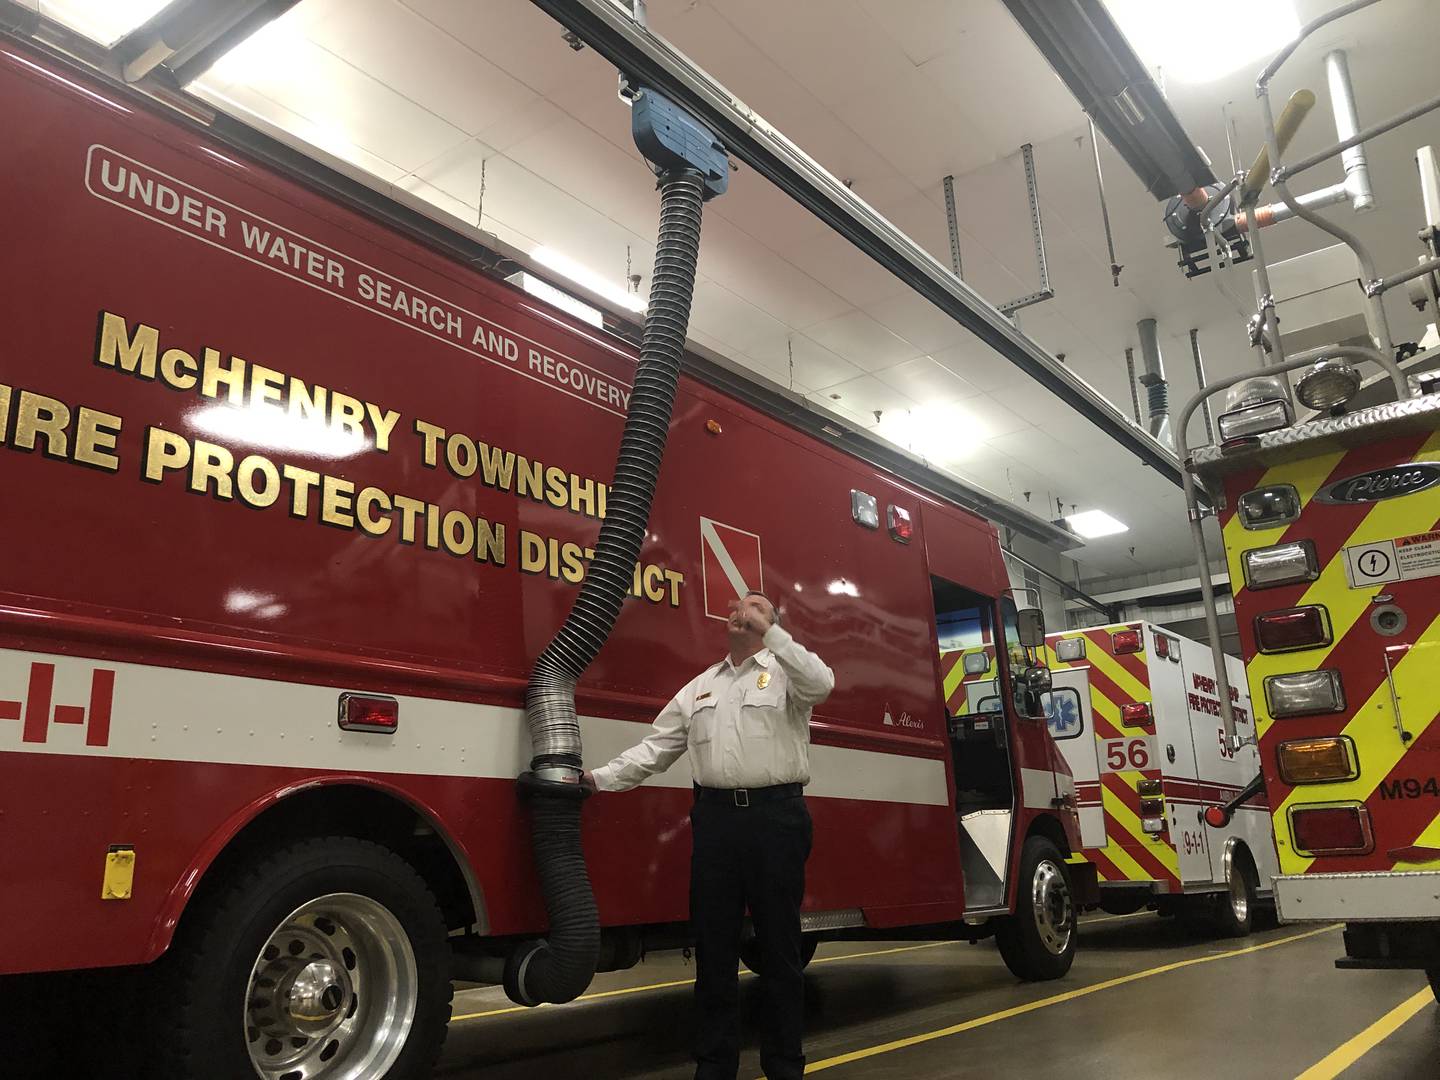 Chief Rudy Horist shows how piping attached to a fire truck's exhaust system helps keep diesel fumes, a known carcinogen, from filtering into the air at McHenry Township Fire Protection District's Station 1 on Jan. 23, 2023.